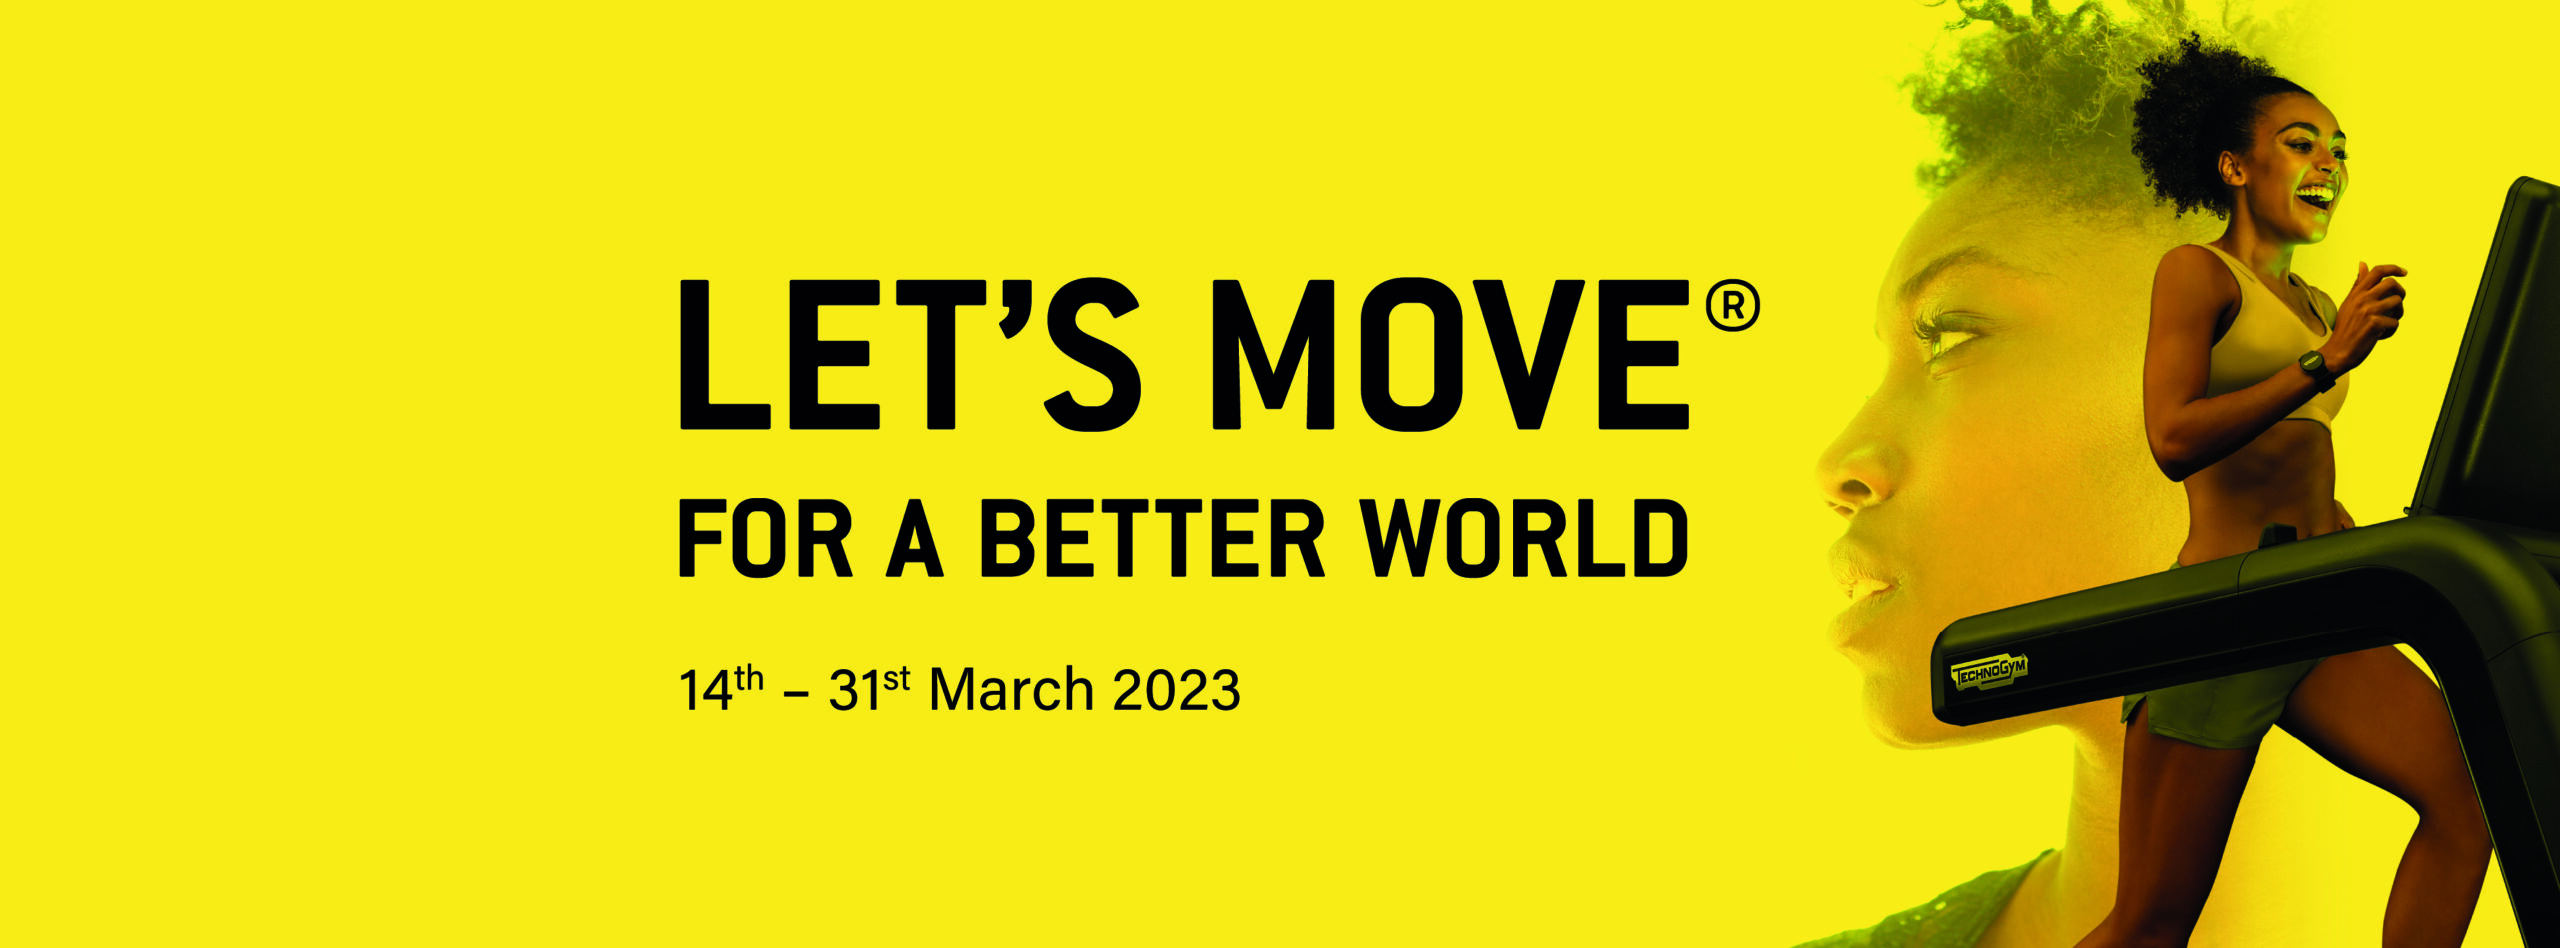 Let's MOVE for a Better World Fitness Challenge